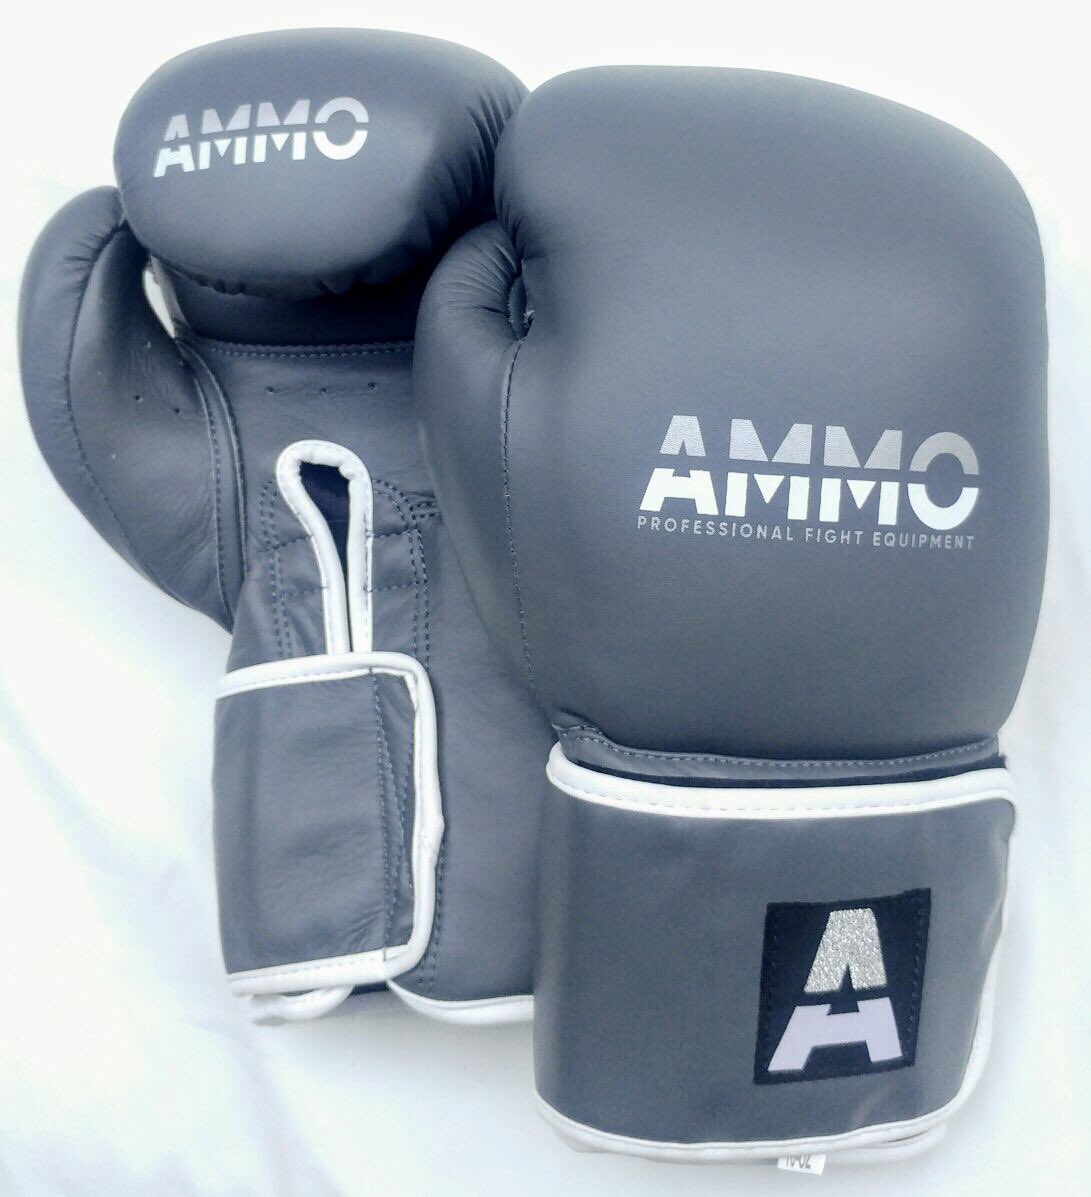 AMMO on Twitter: "Drop us a DM for prices 👊🏻 #Boxing #MMA ...